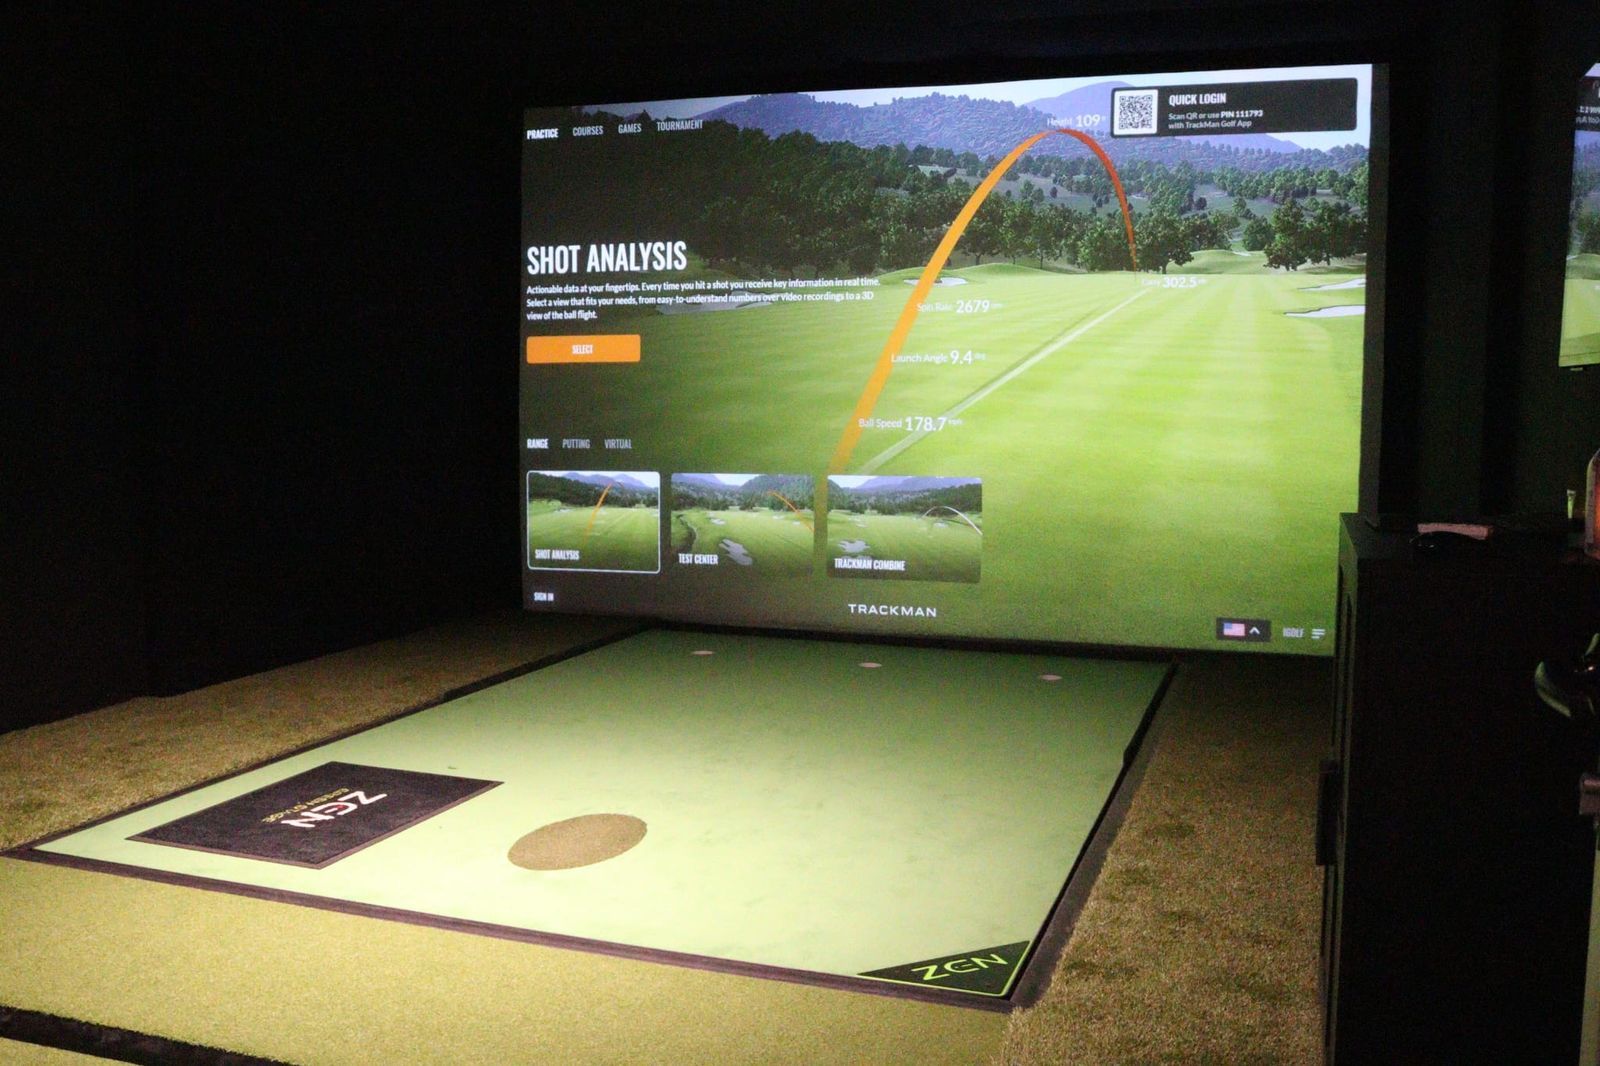 Trackman bay with shot analysis on the screen